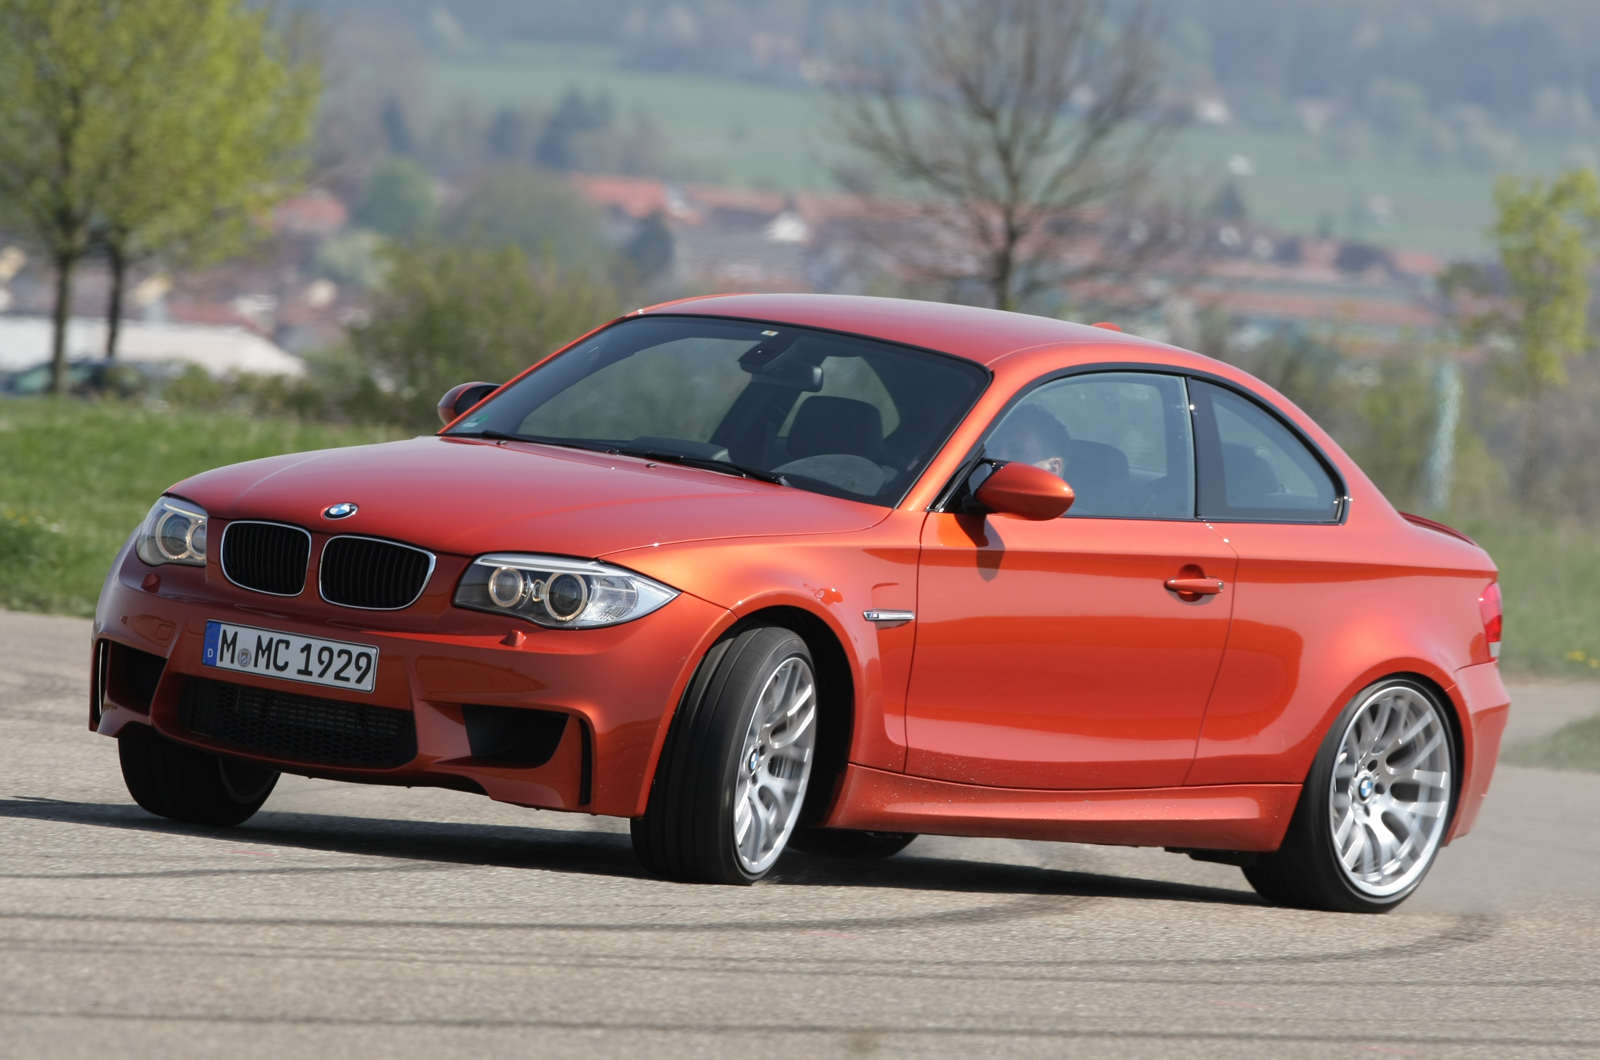 BMW 1 Series (2011-2015) Review